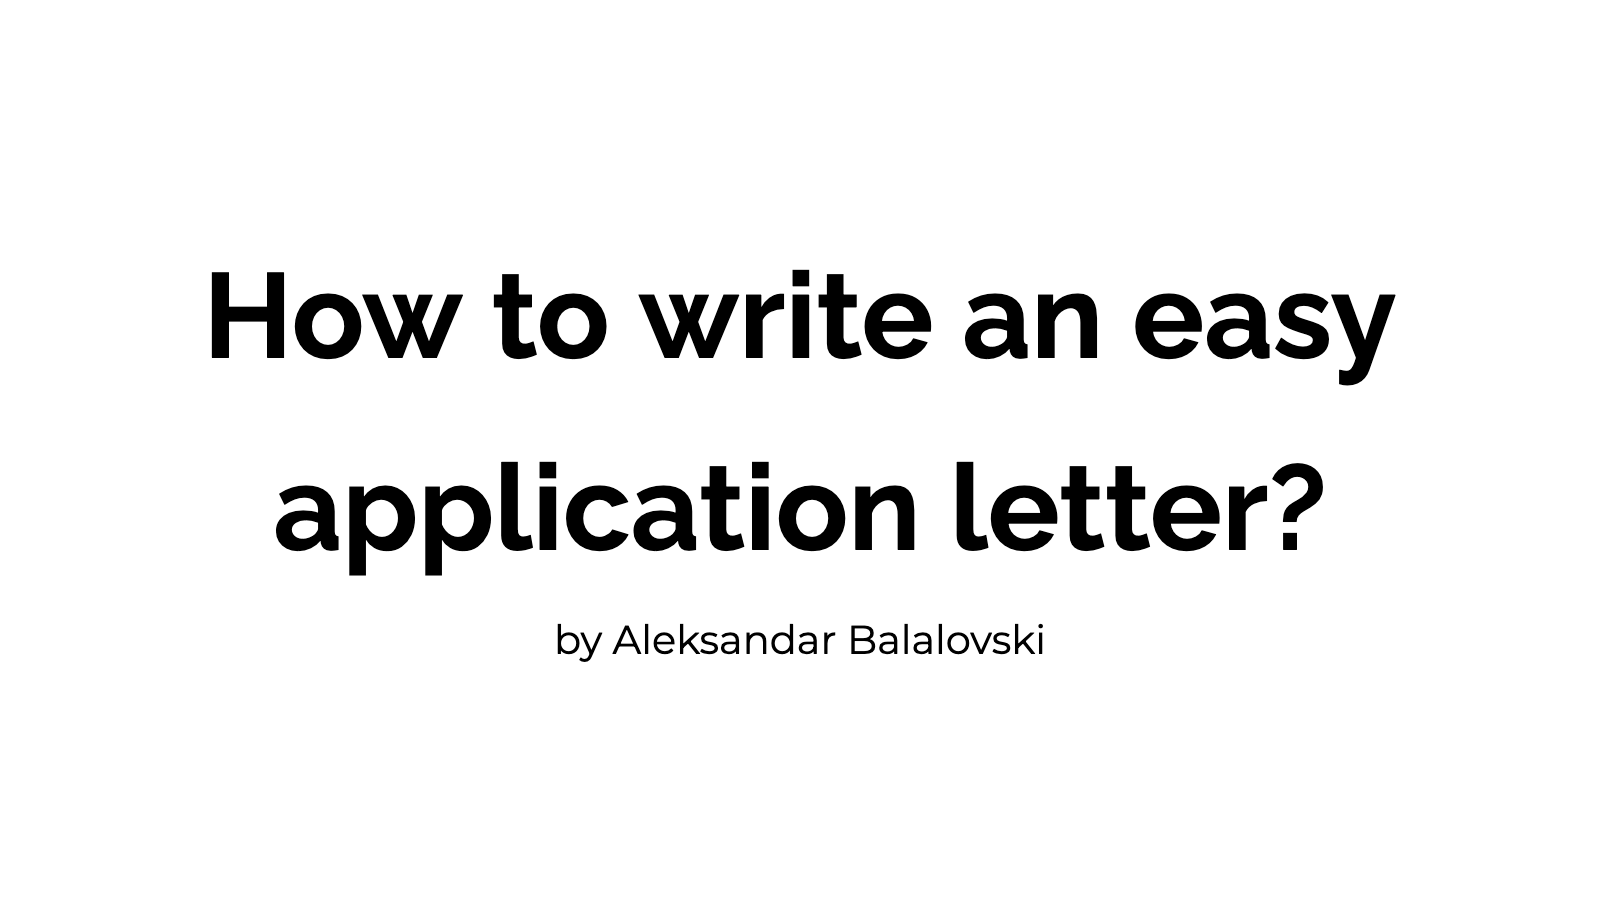 should application letter be handwritten or typed